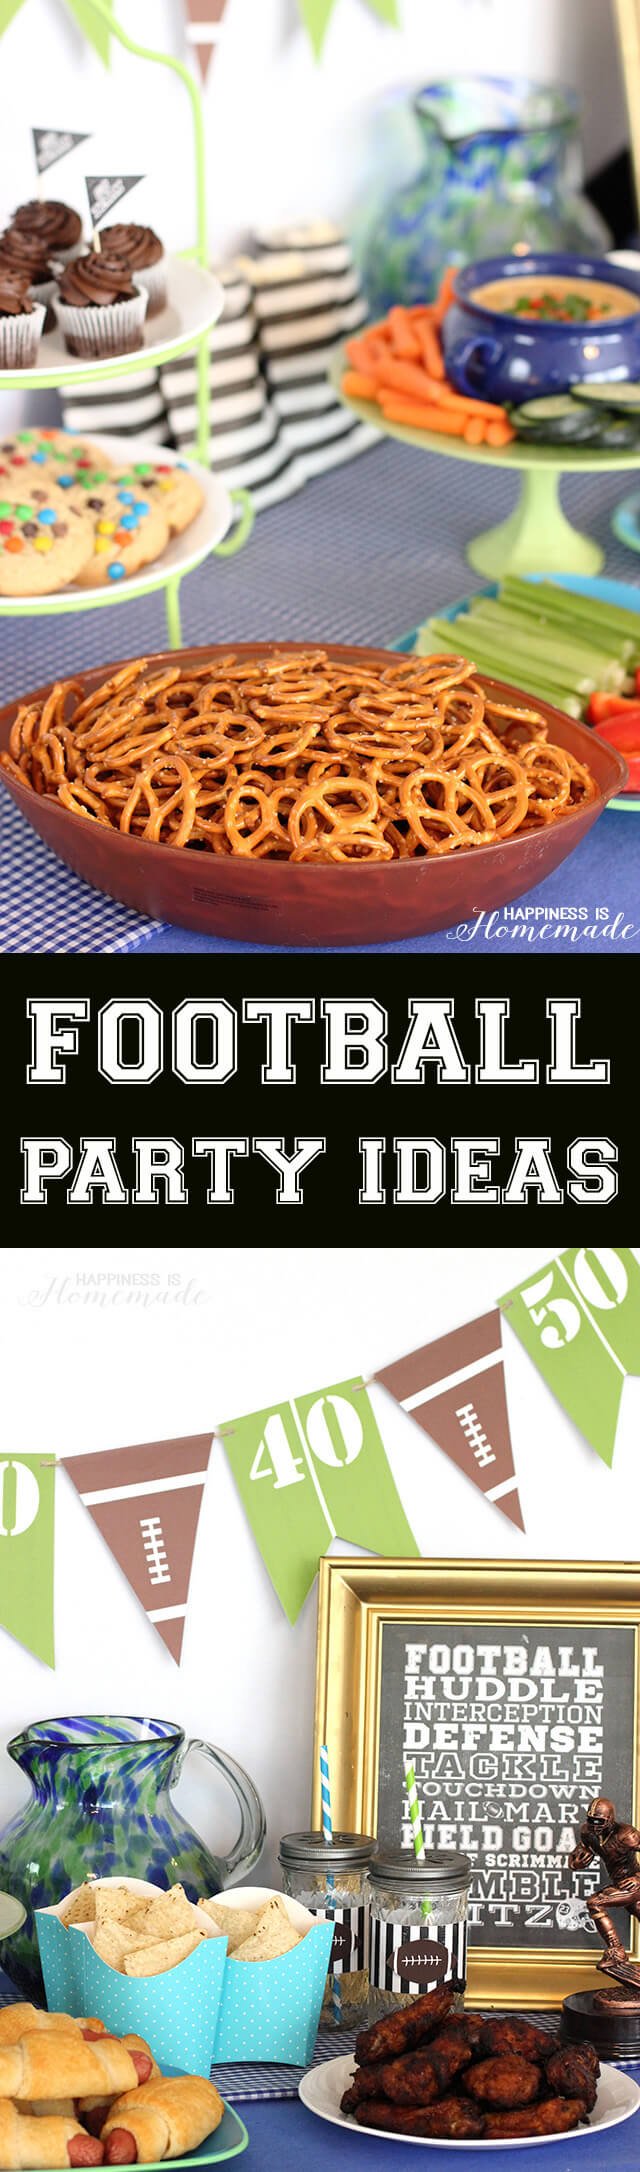 Football Party Ideas - Happiness is Homemade